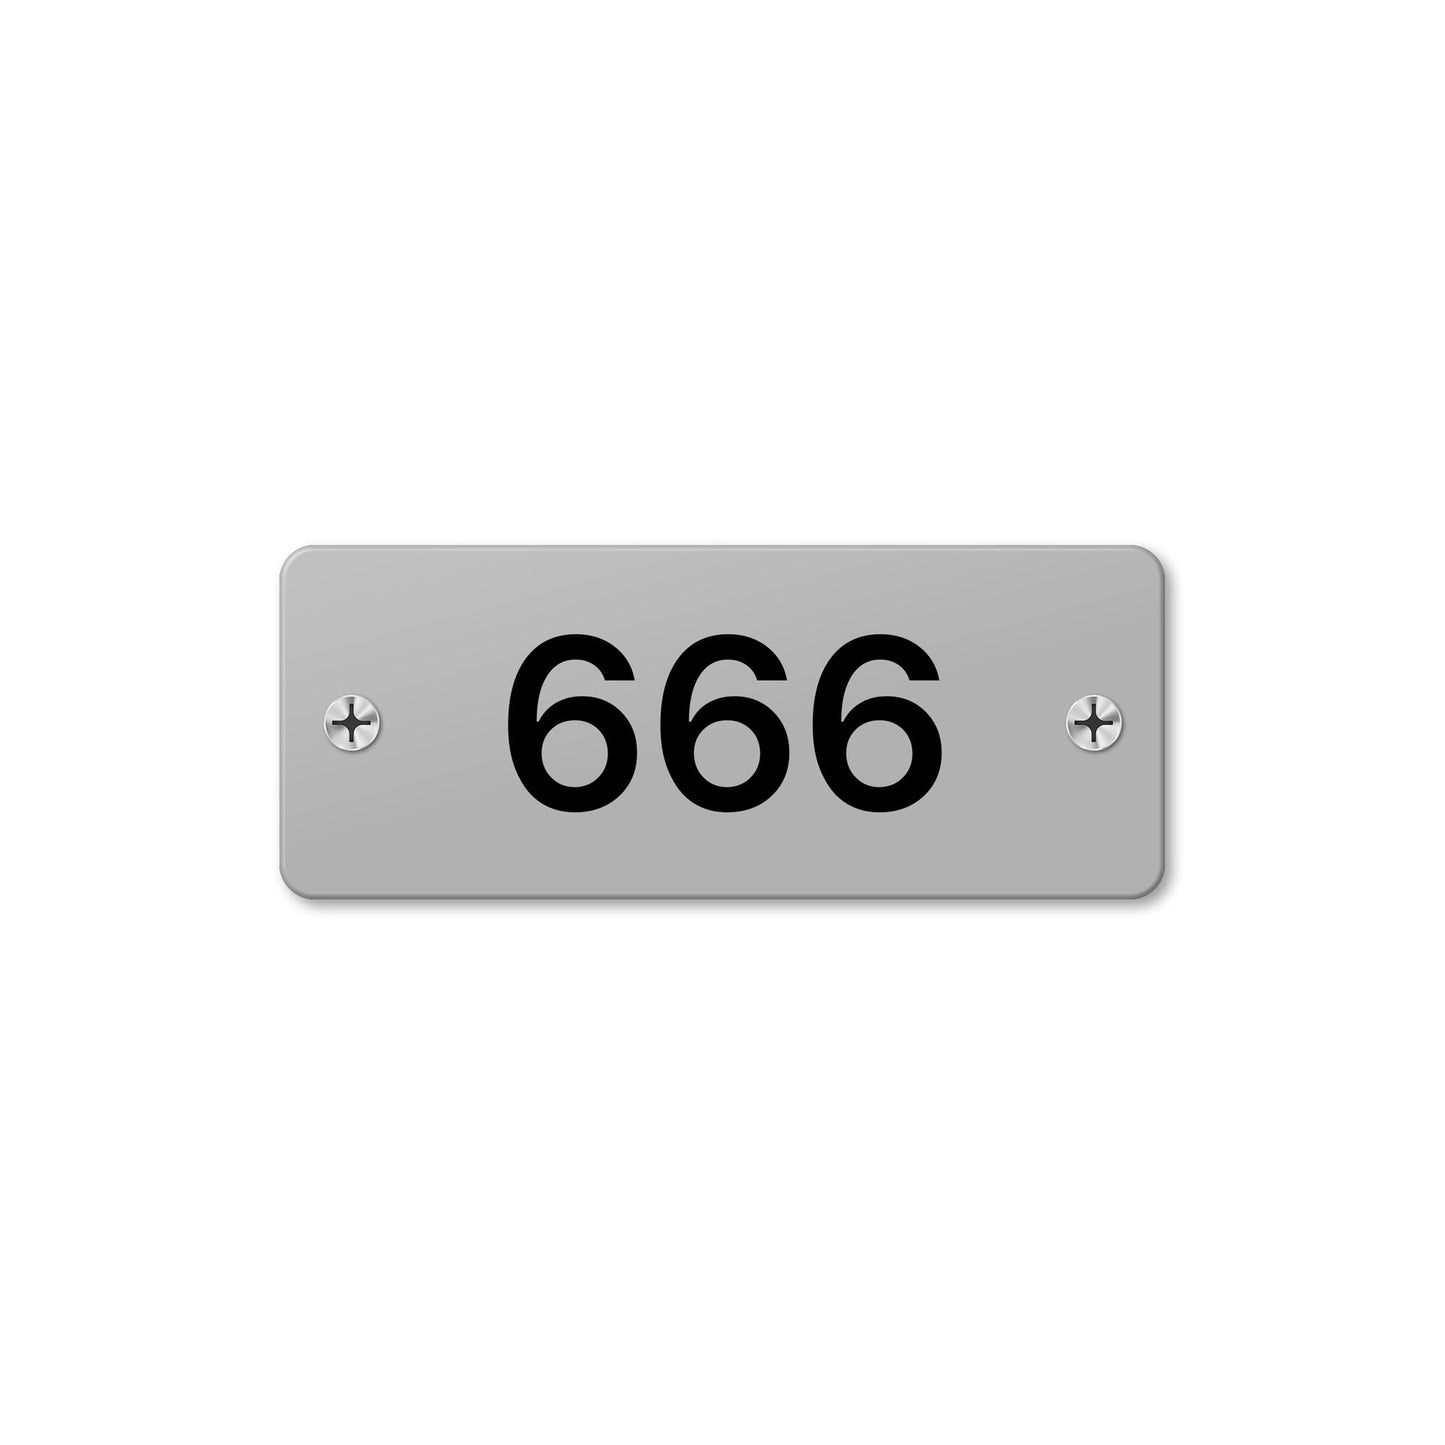 Numeral 666